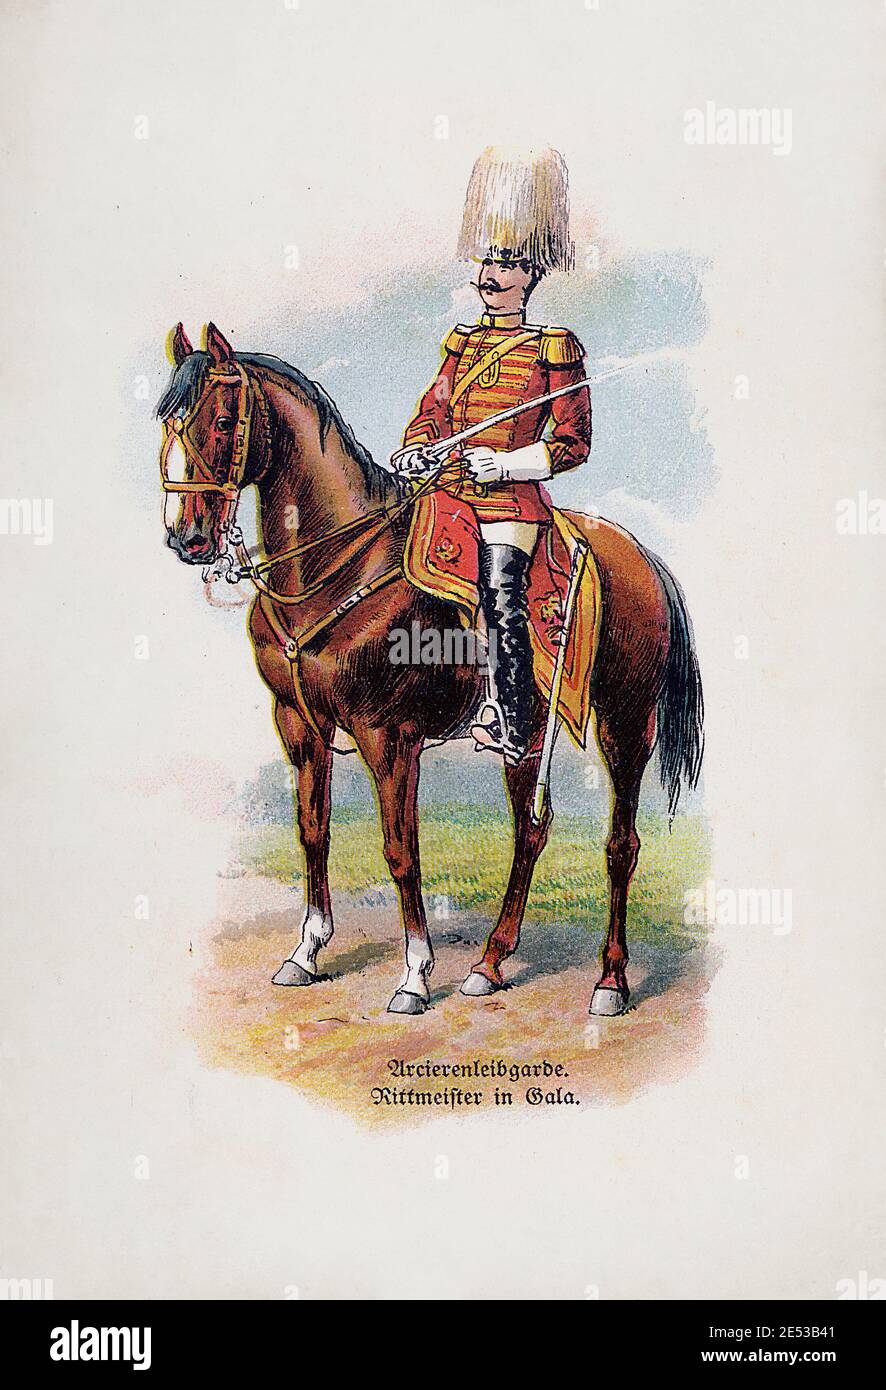 Austro-Hungarian Armee (Imperial and Royal Armed Forces). Arcieren-Leibgarde. Rittmeister (military rank of cavalry officer) in gala uniform. Austro-H Stock Photo